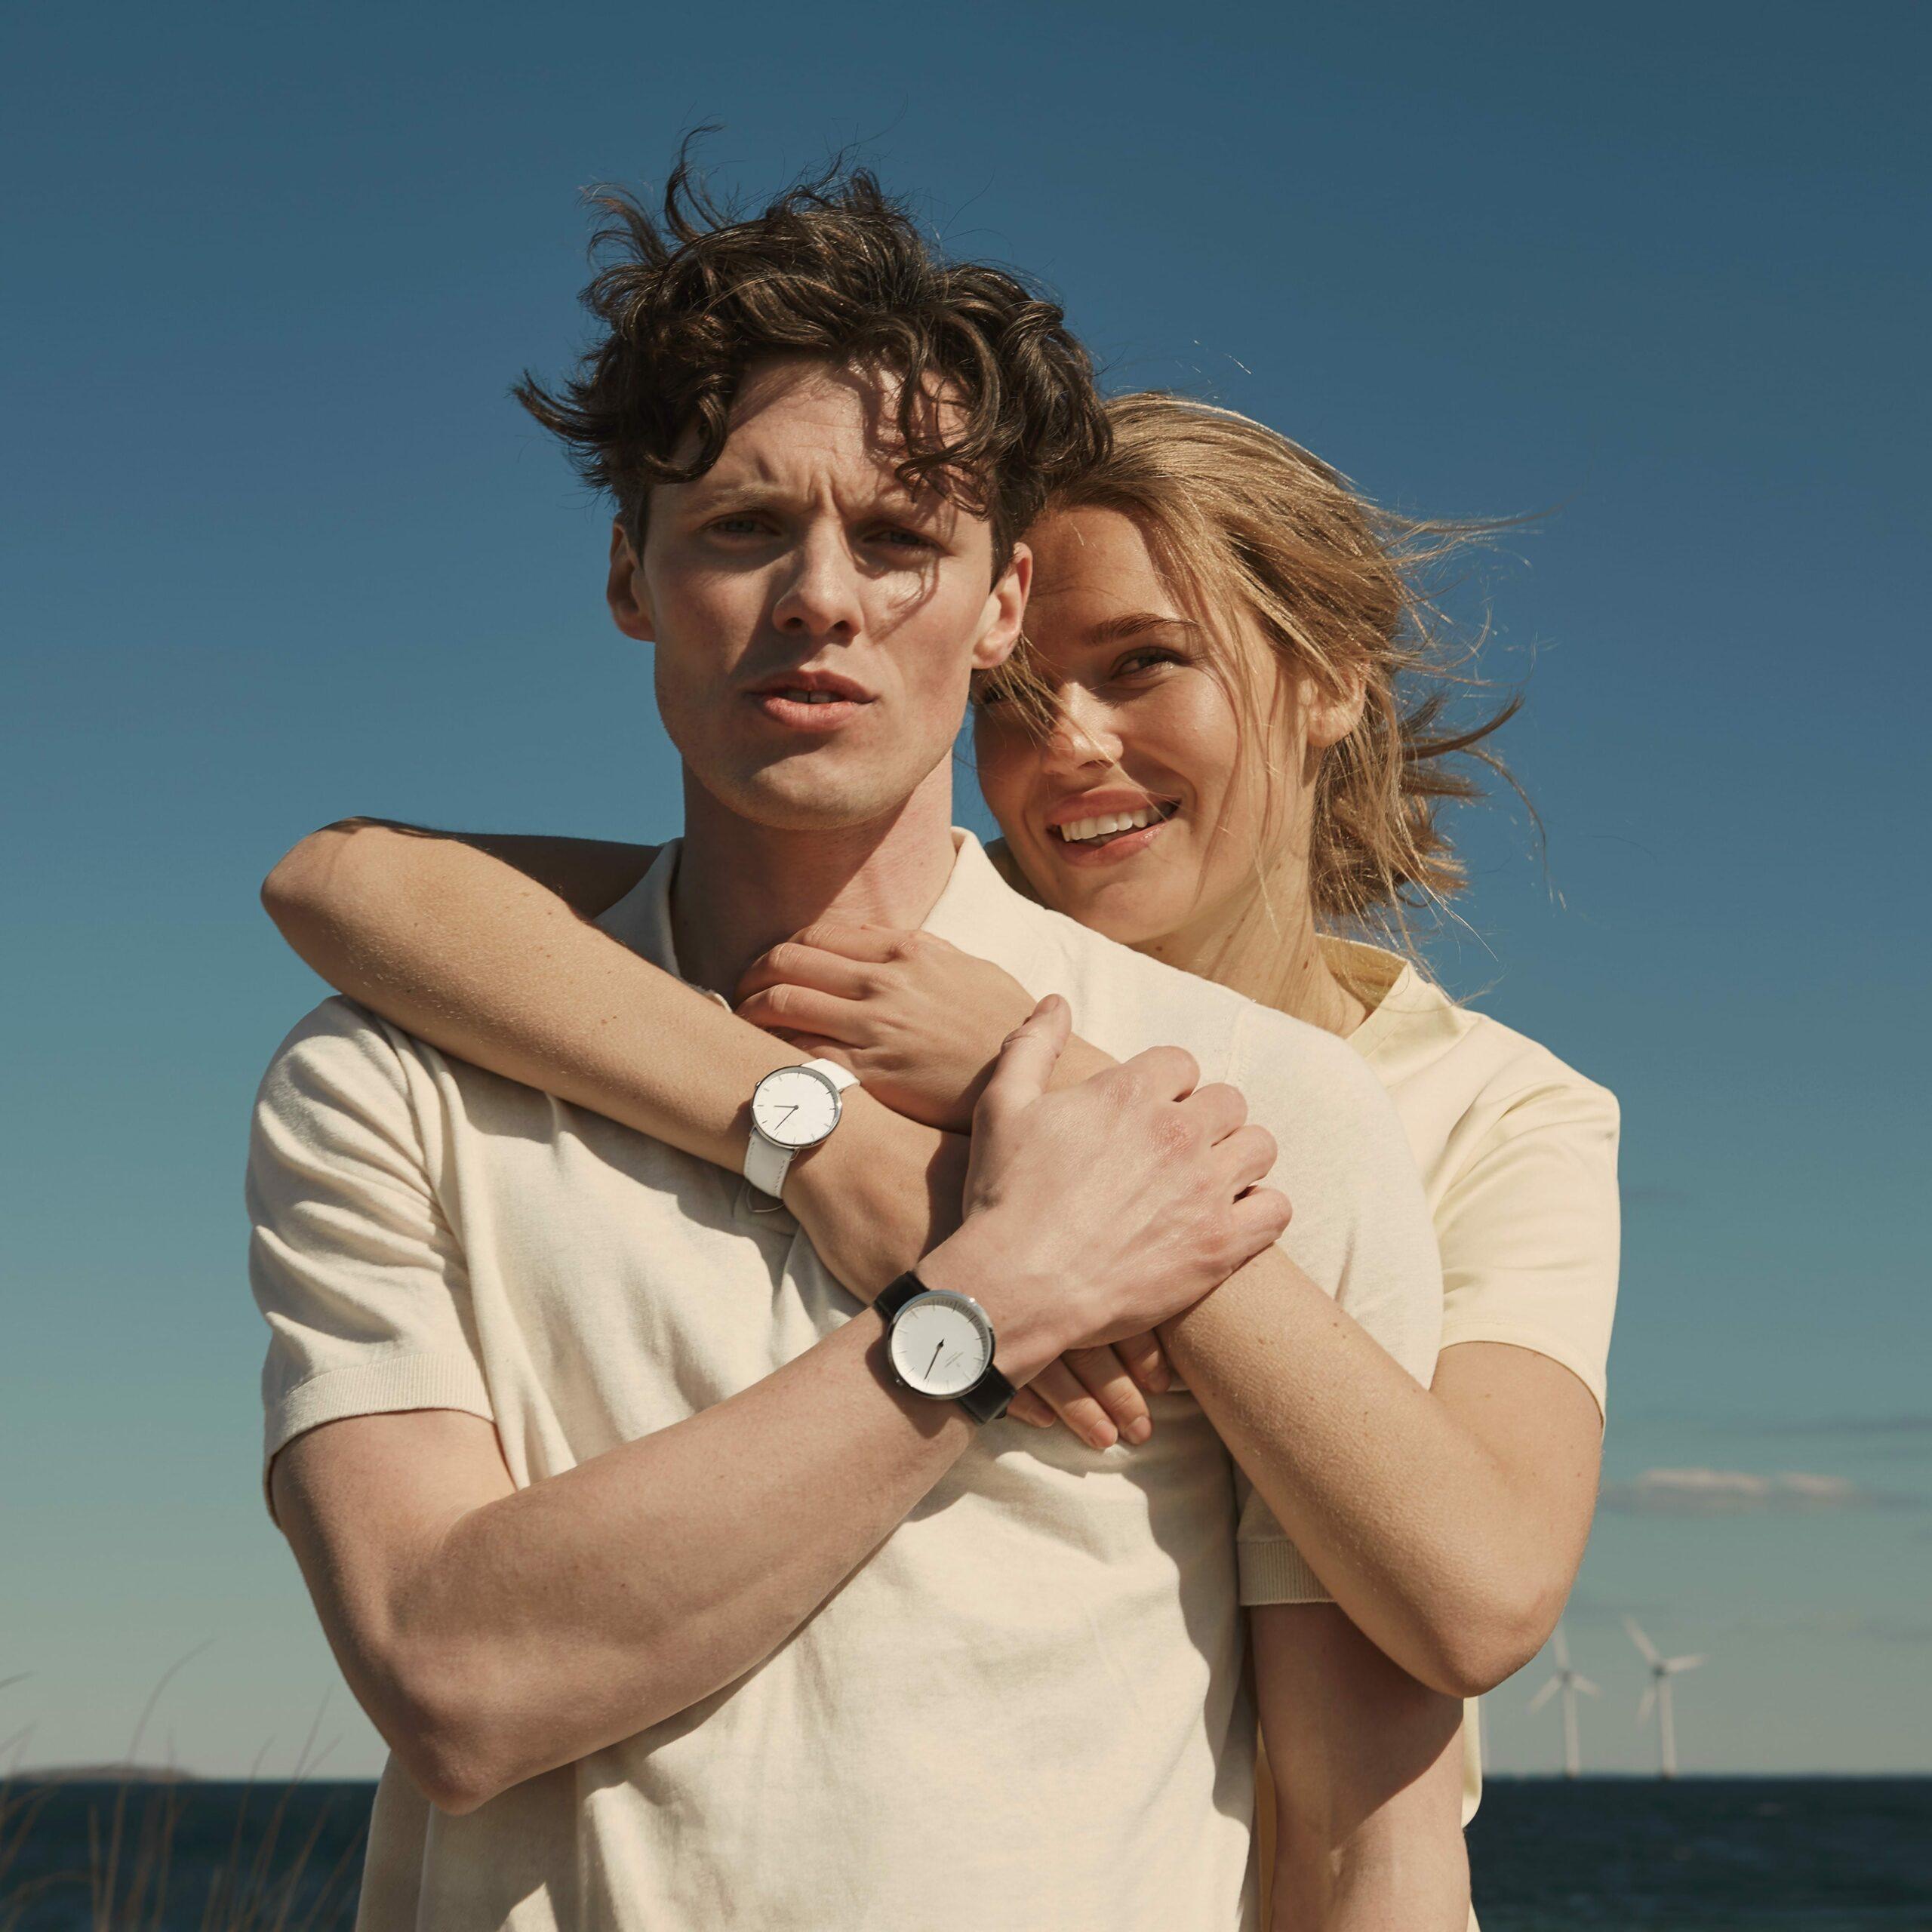 Nordgreen Male & Female Model Wearing Matching Watches While Hugging